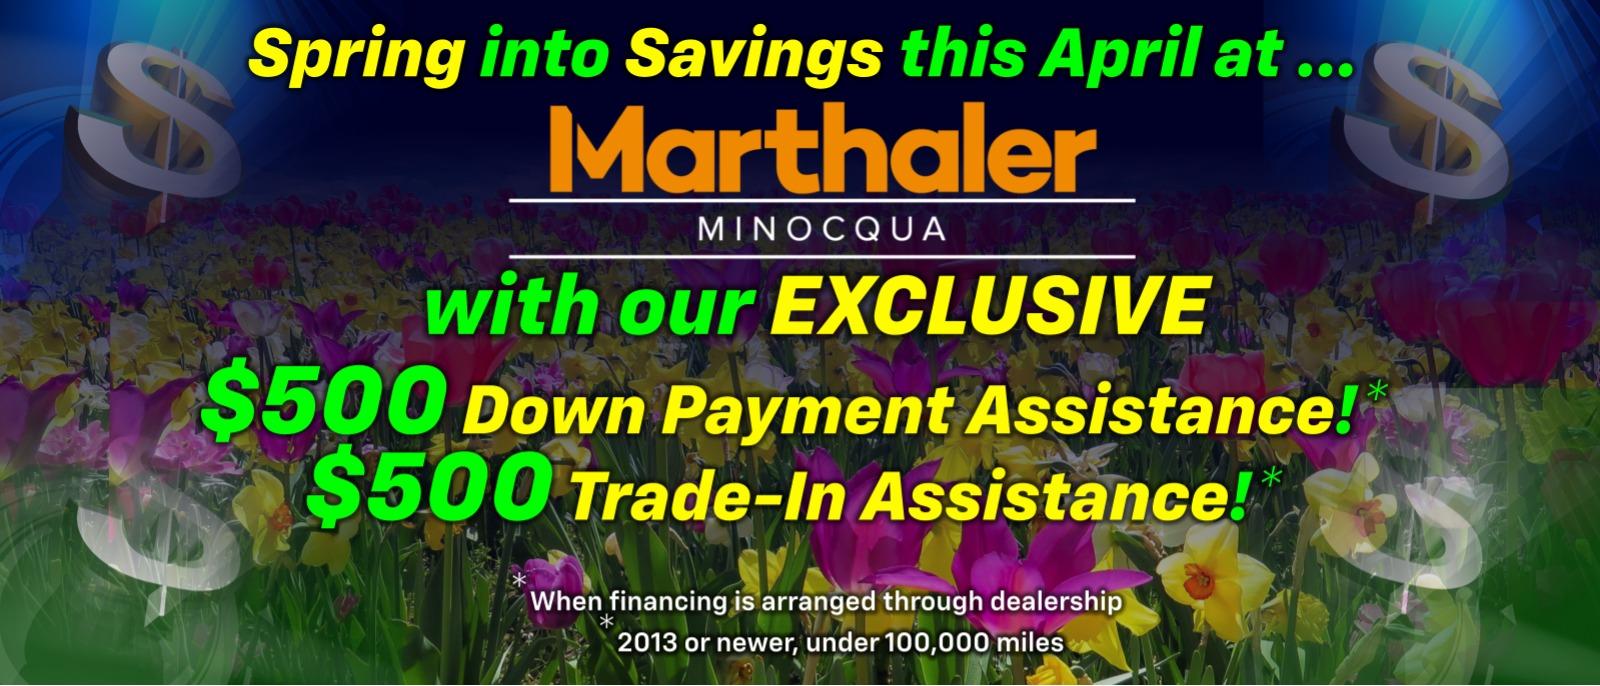 Down Payment Assistance - Trade-In Assistance